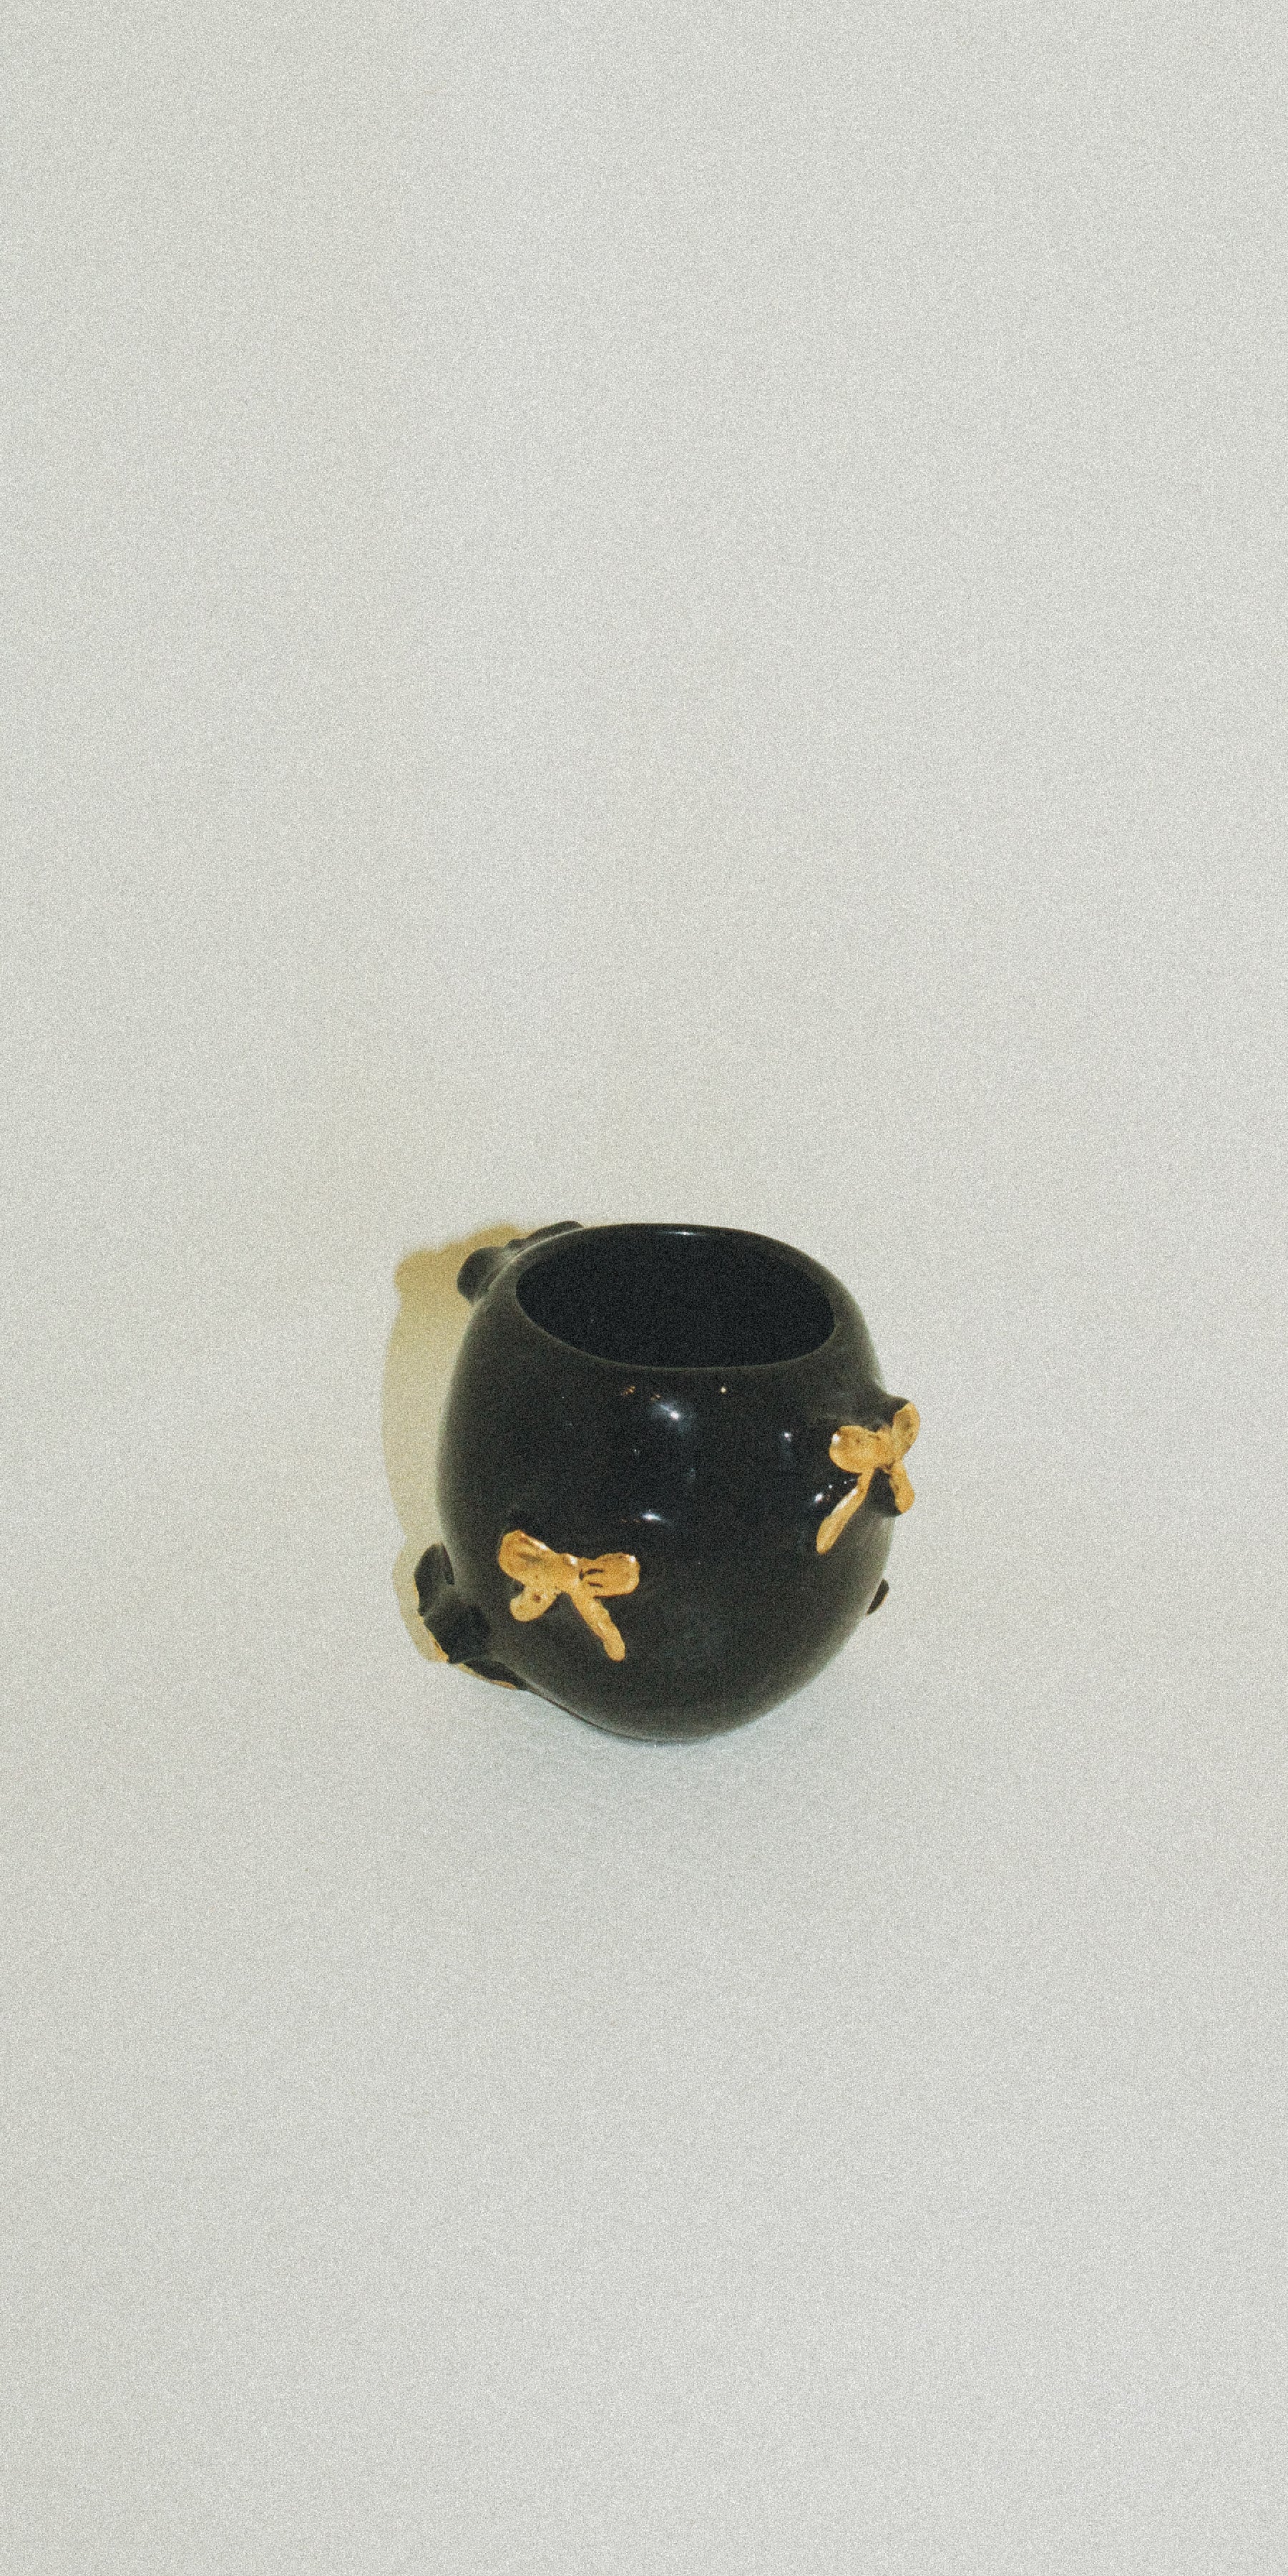 Bow cup - Black and Gold